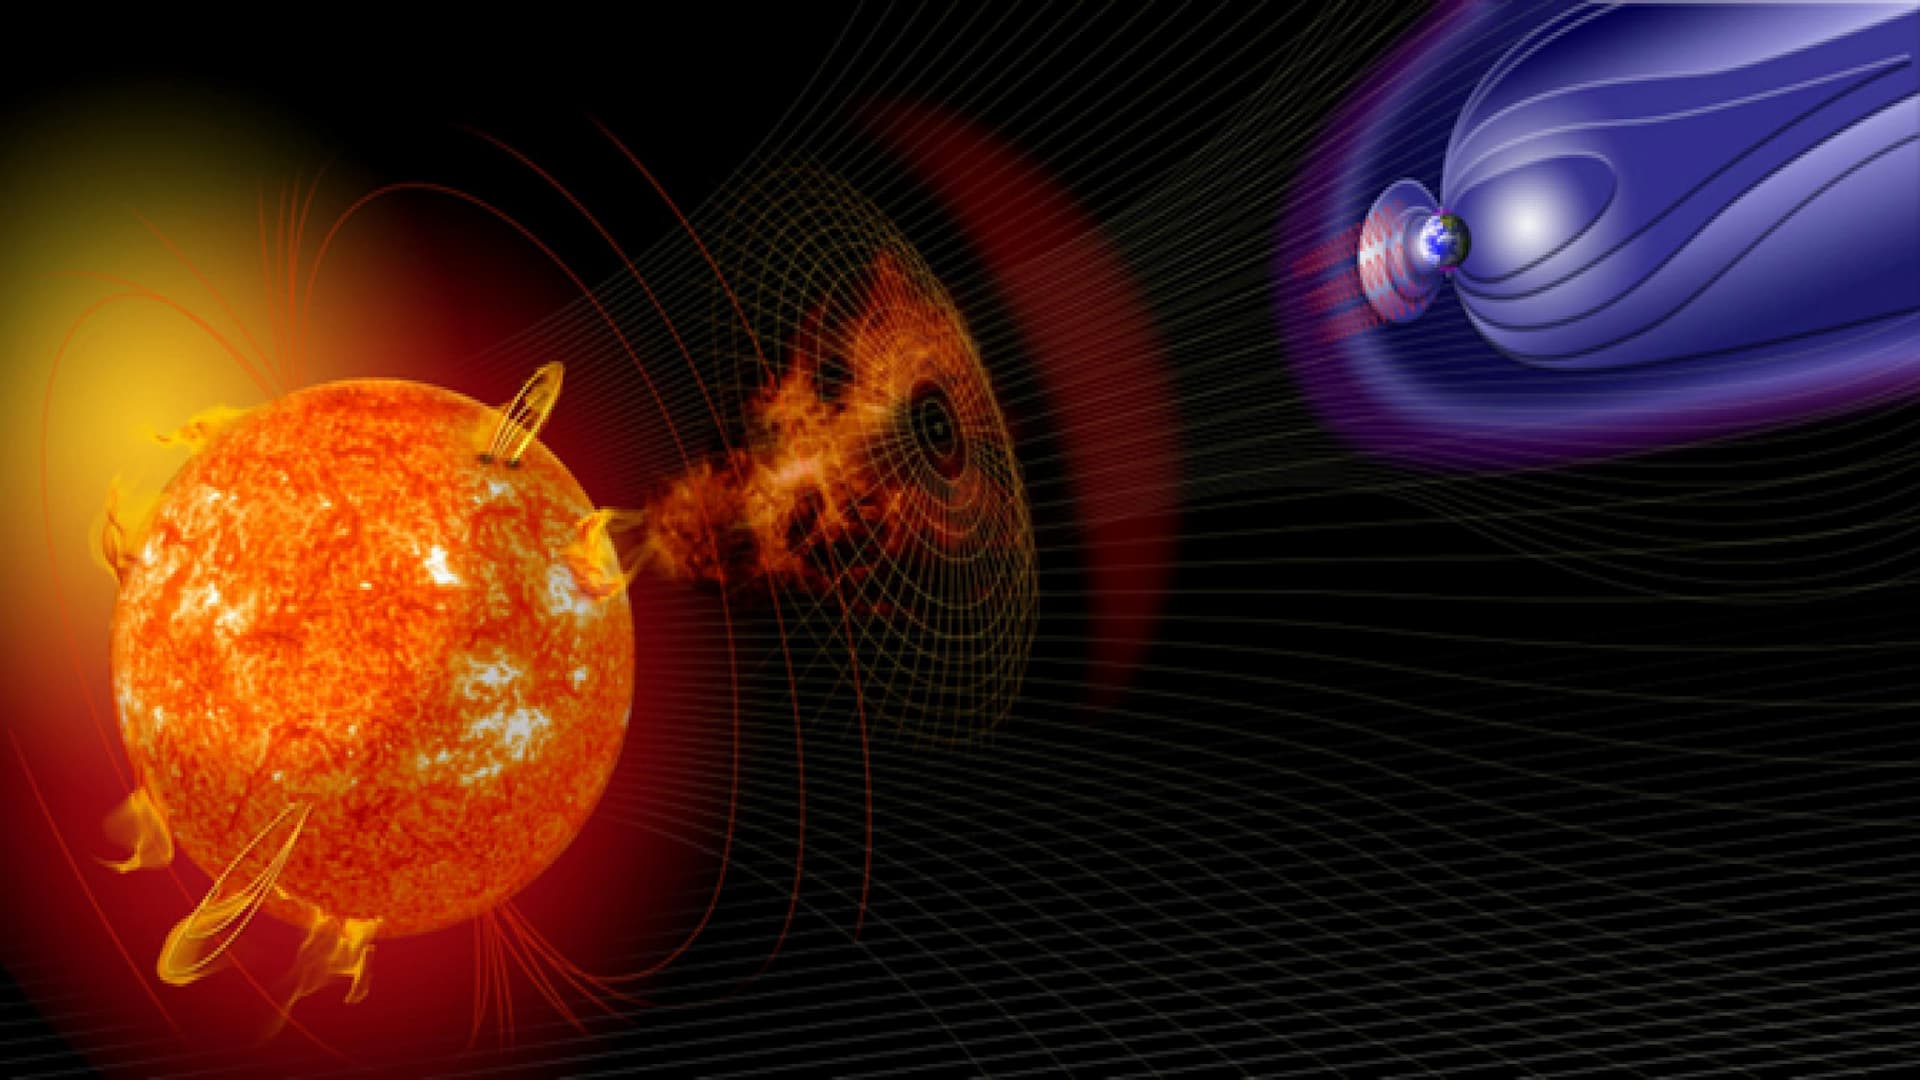 MoRe-ASI: Large-scale solar wind structures in the heliosphere and their Space Weather impact